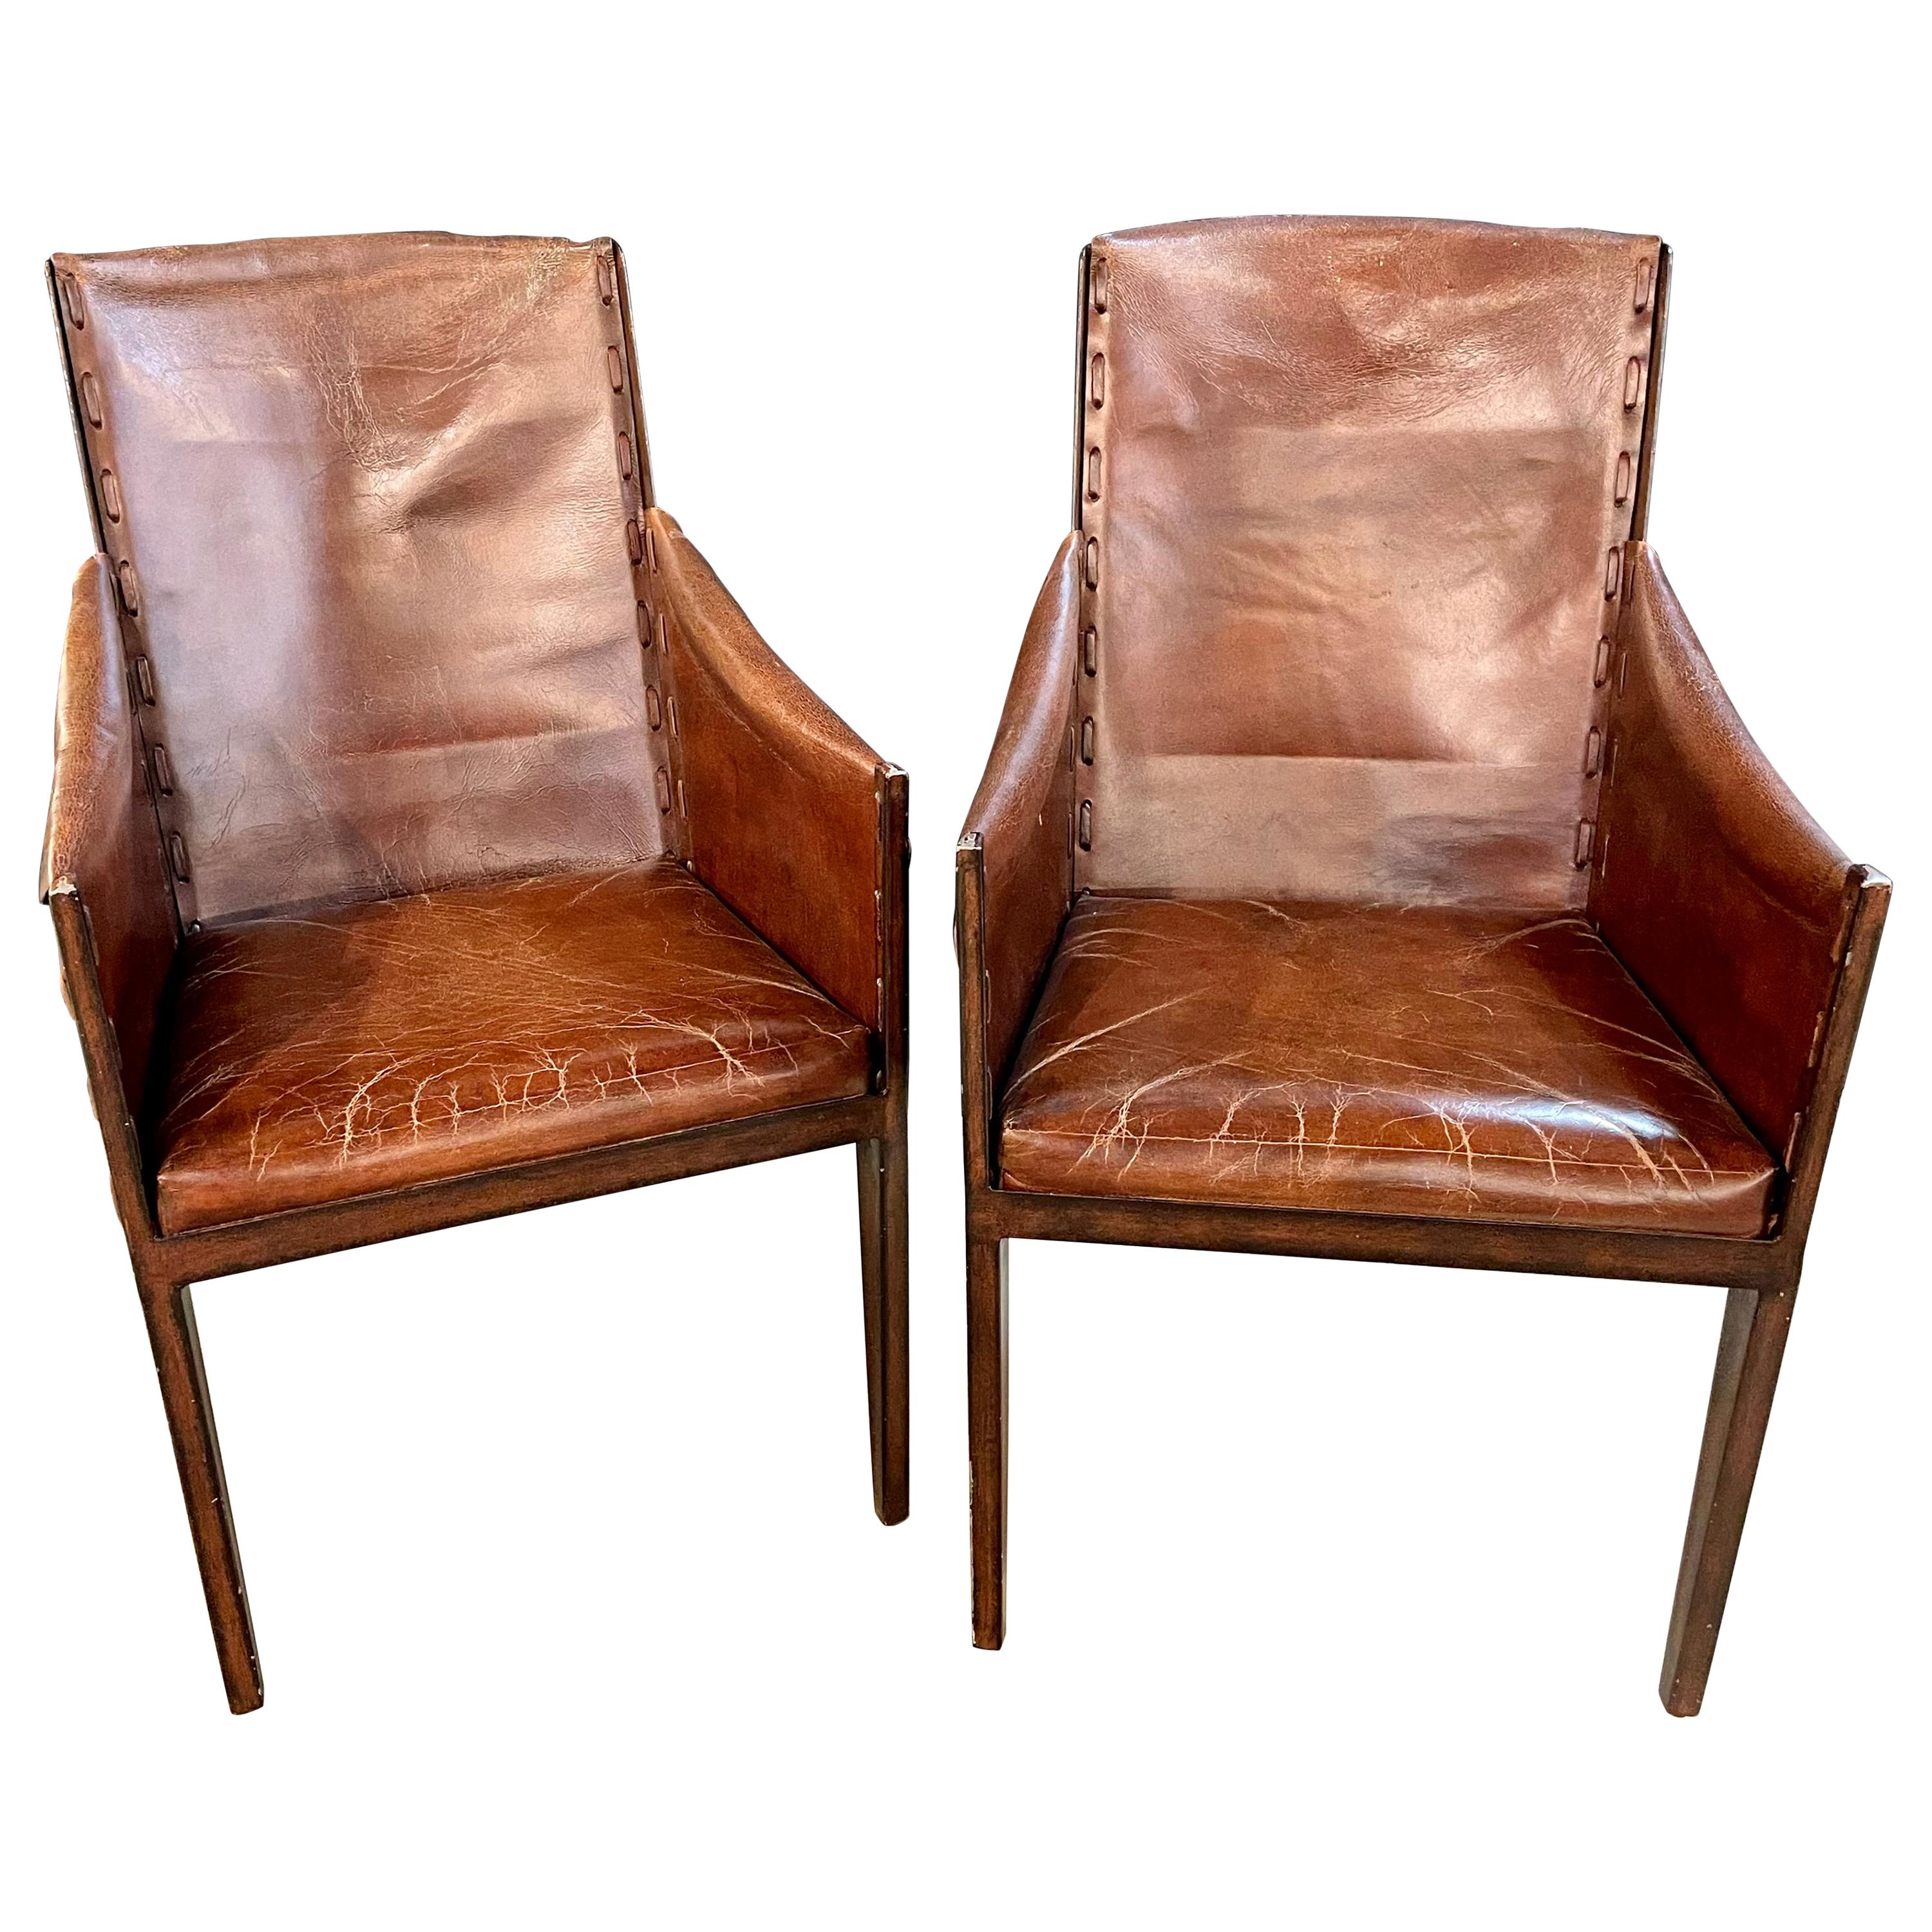 Pair of Jean Michel Frank Style Arm Chairs, Leather and Metal